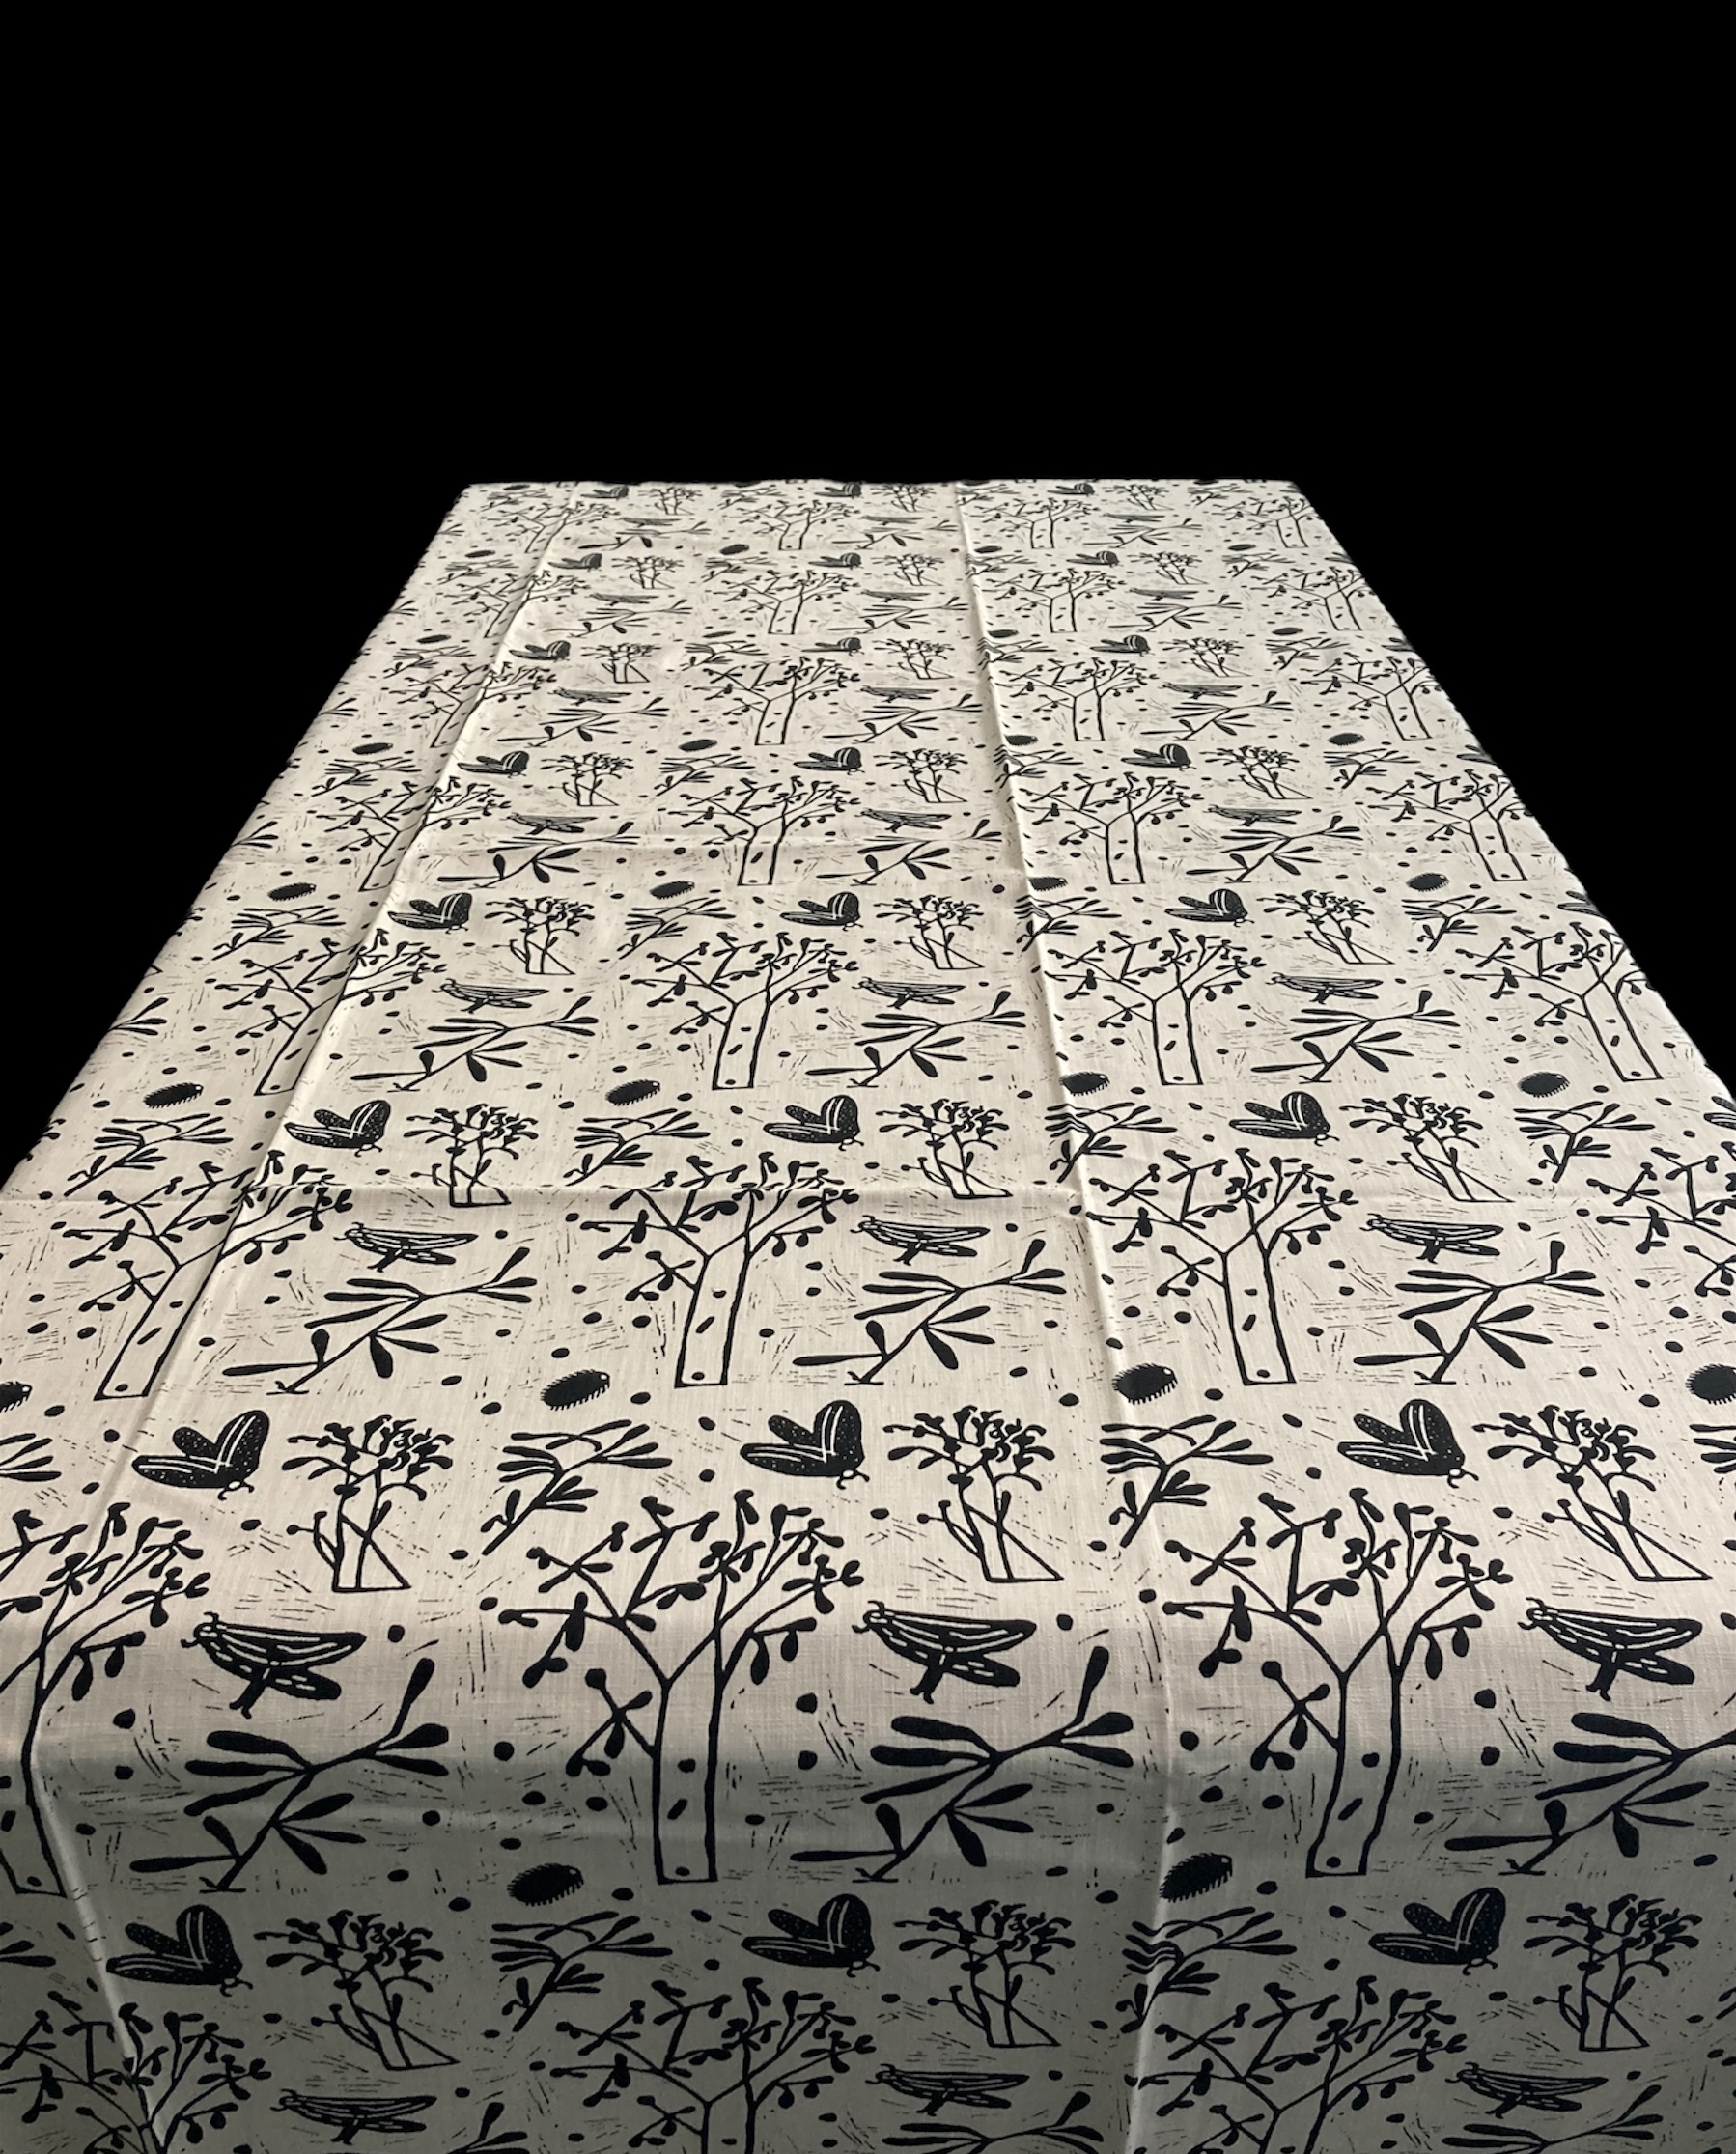 100% cotton Tablecloth approx. 87\" x 57\" from Namibia - # bw05t